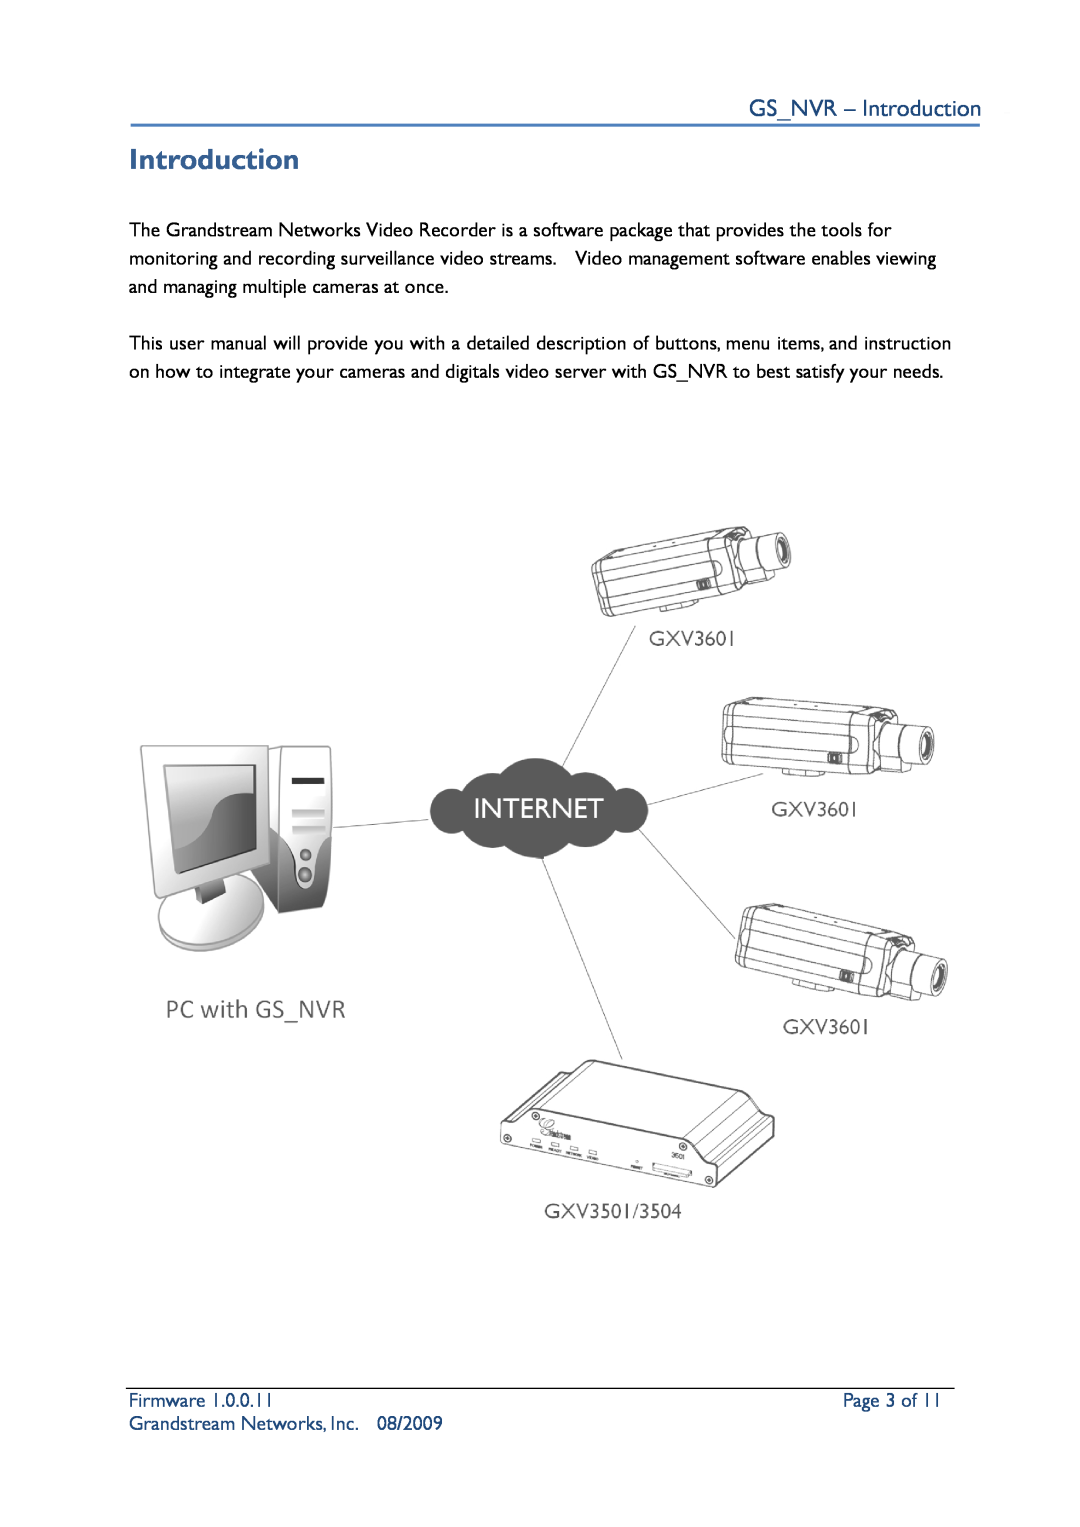 Grandstream Networks Security Camera GSNVR - Introduction, Page 3 of, Firmware, Grandstream Networks, Inc, 08/2009 